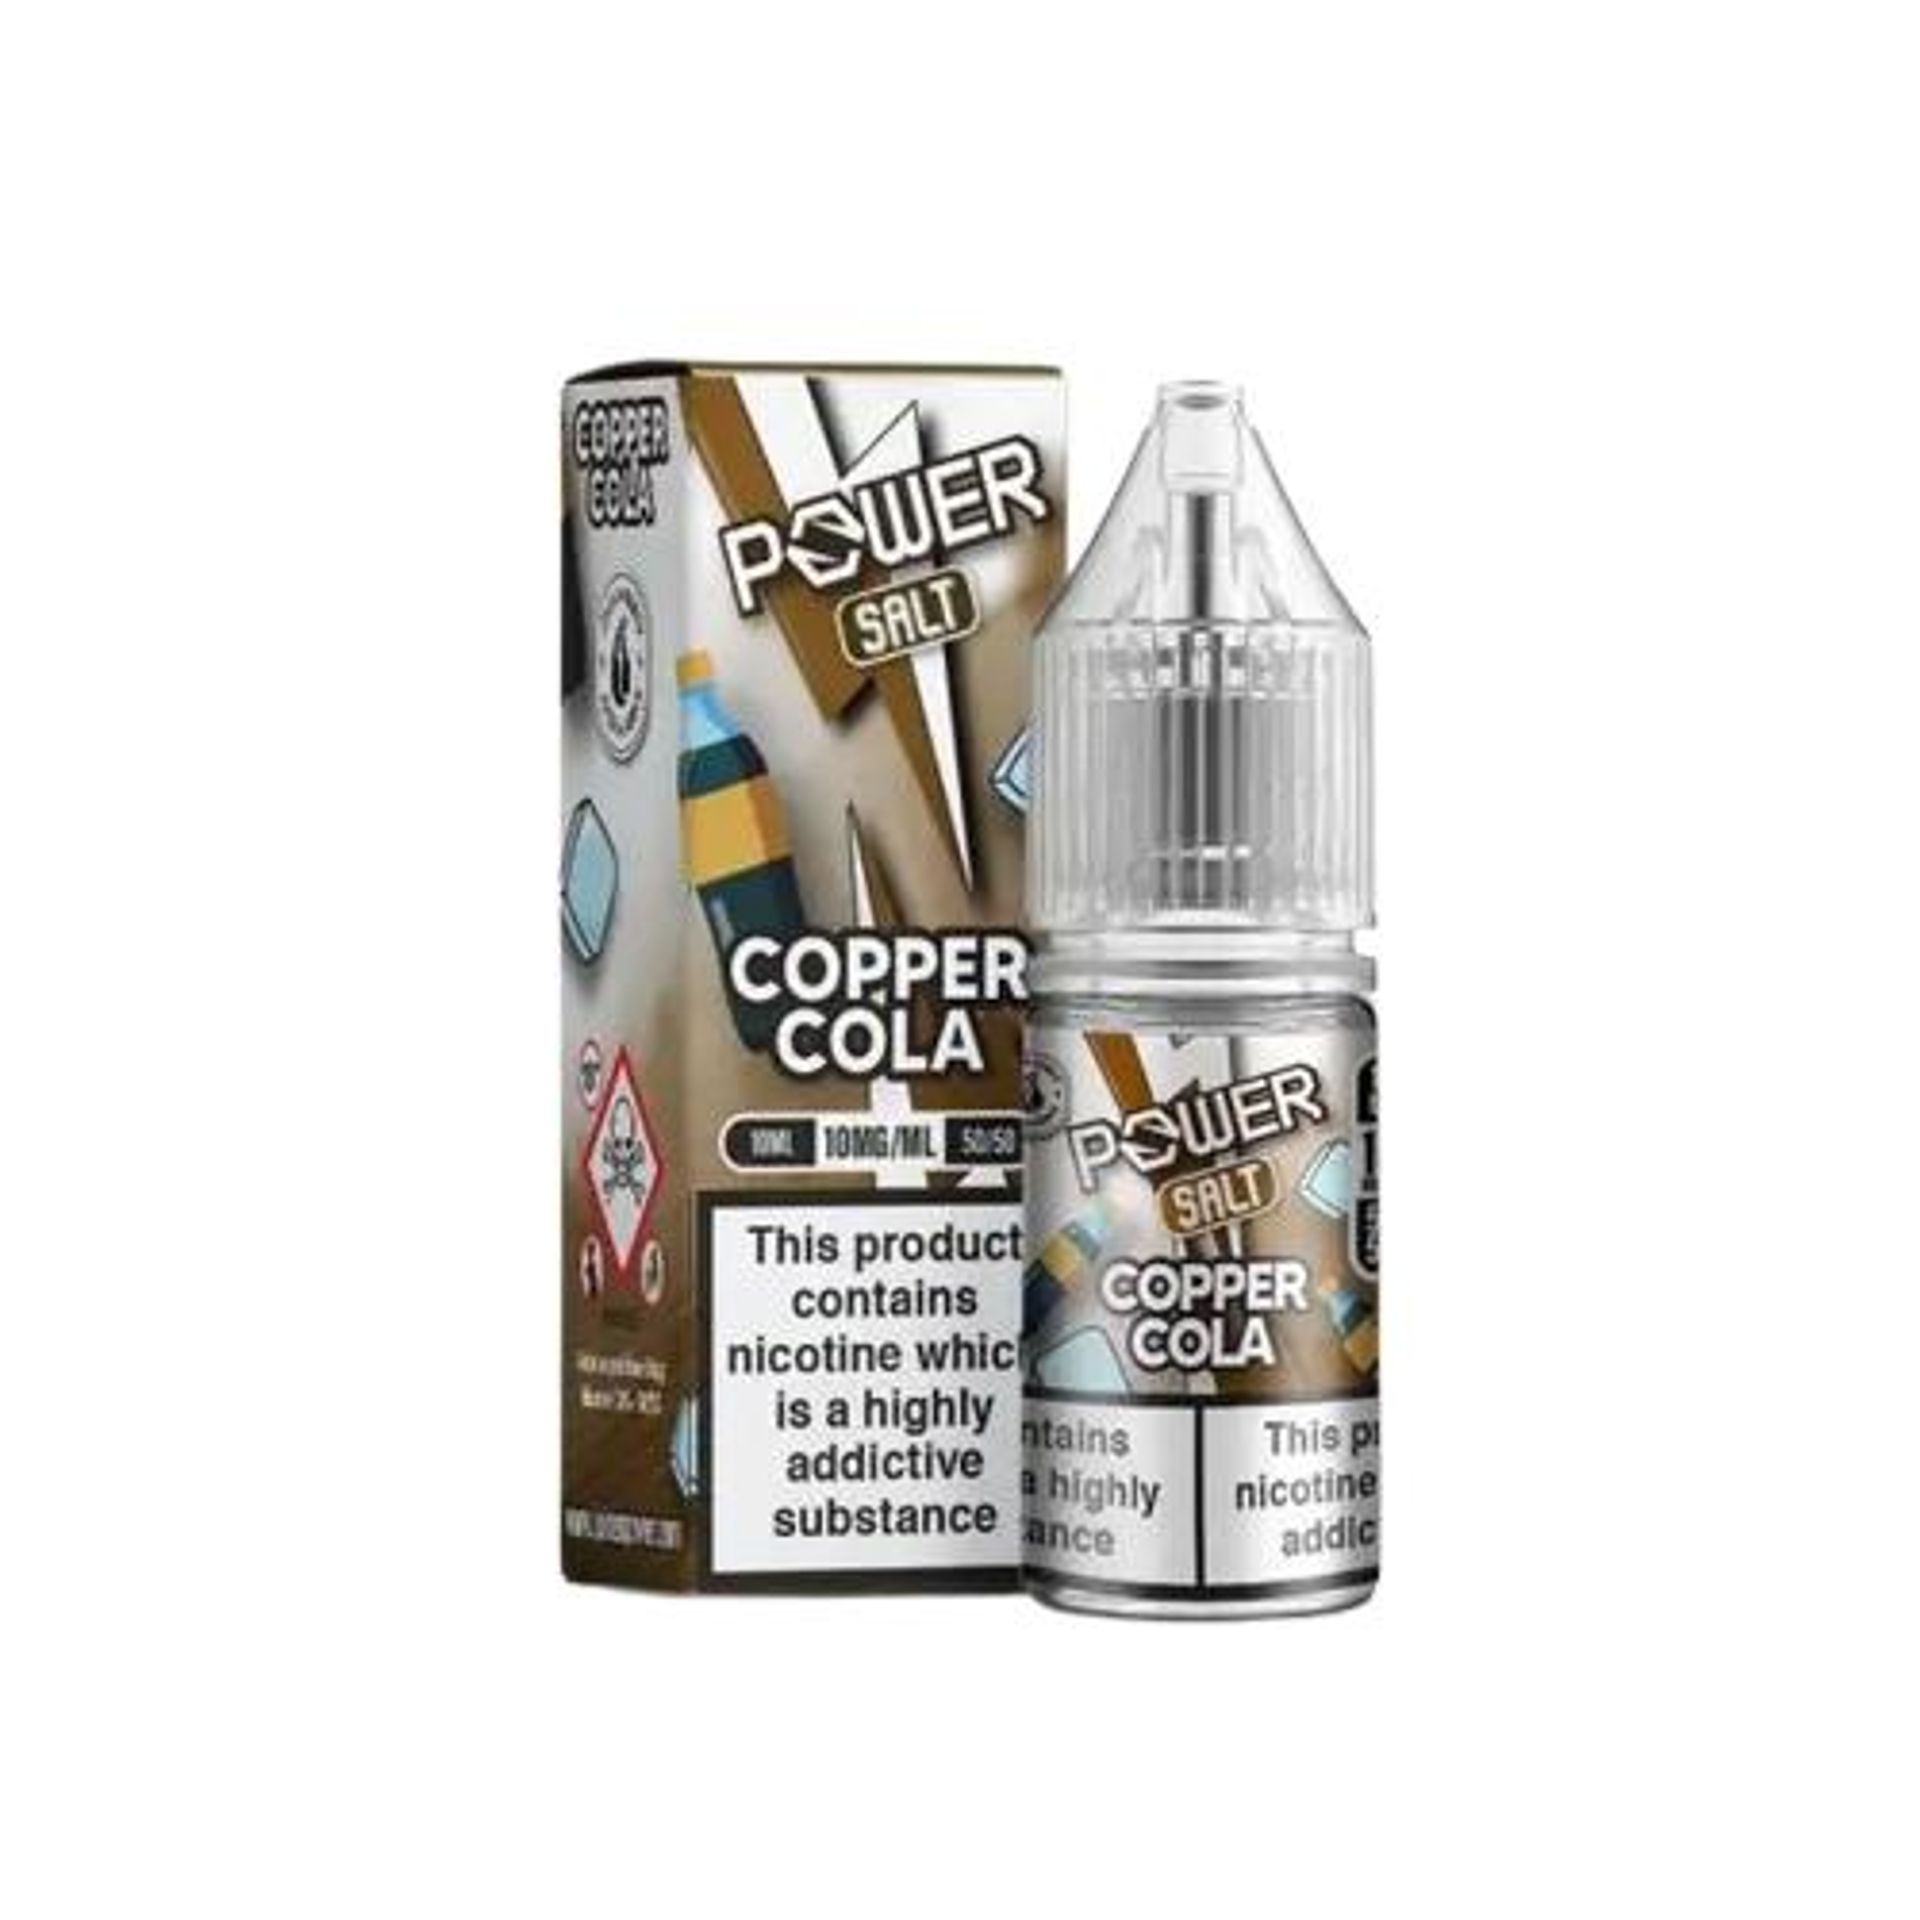 Image of Copper Cola by Power Bar